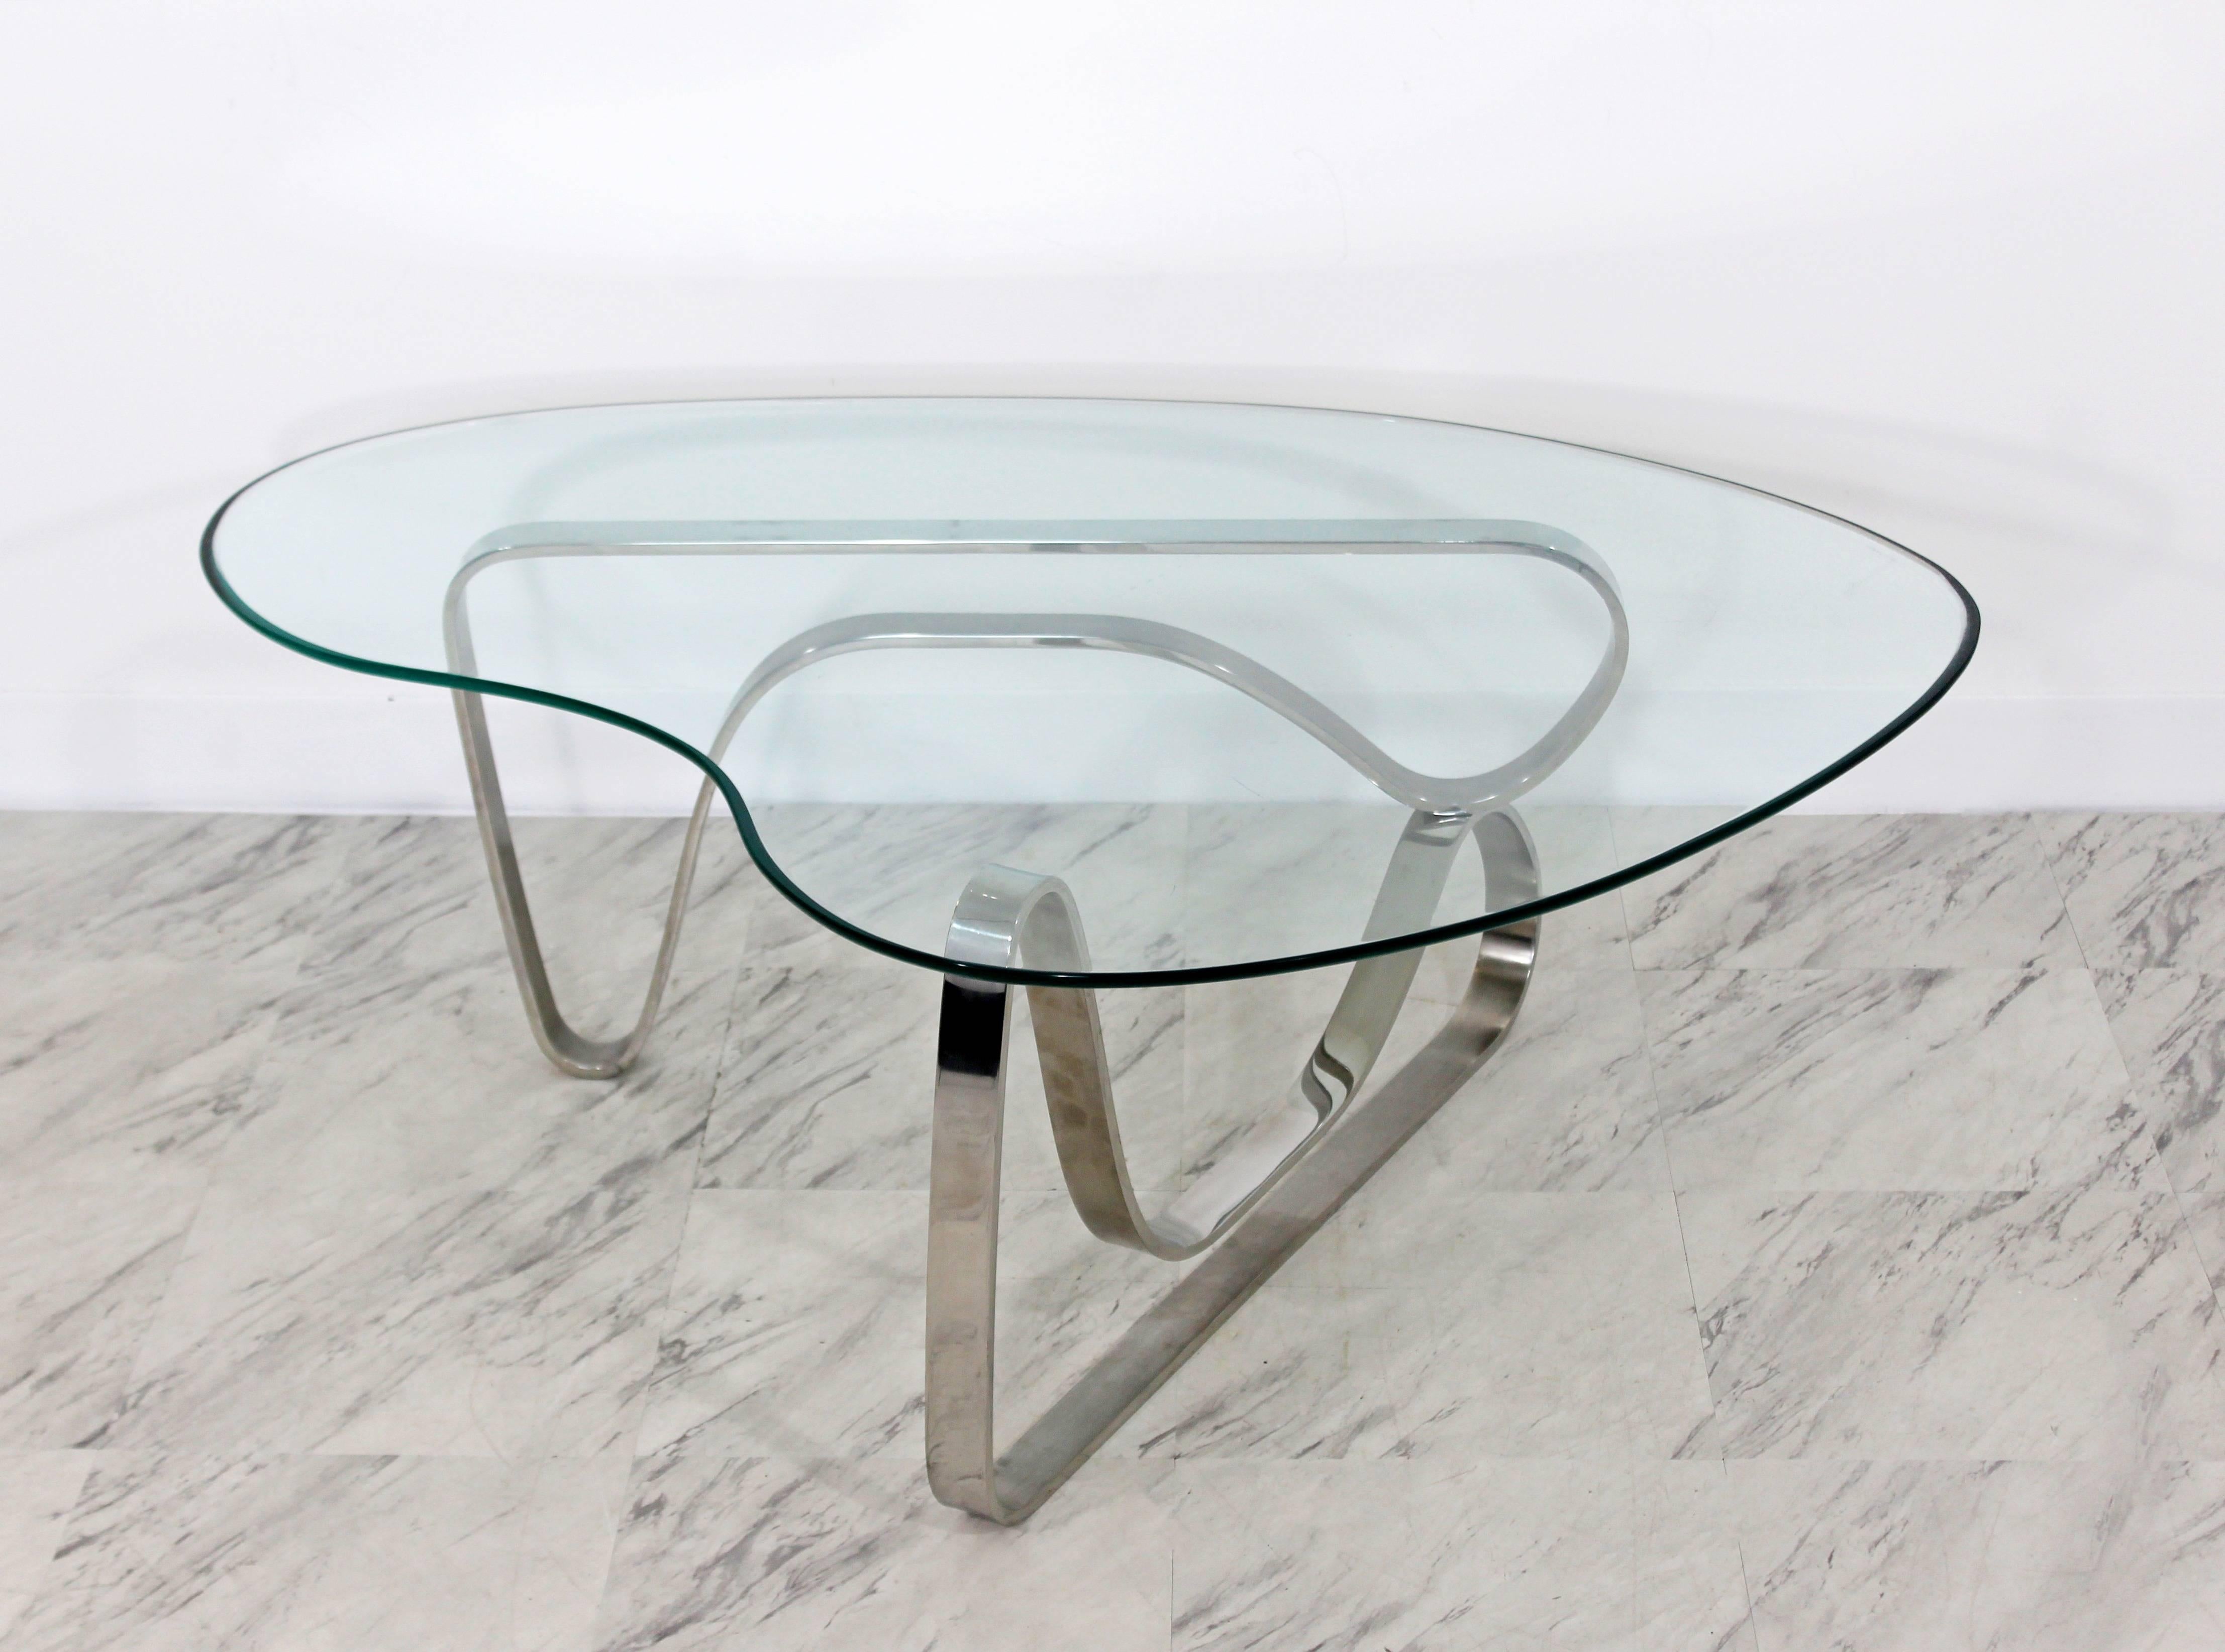 For your consideration is a unique and luxe looking coffee table, with a sculptural asymmetrical chrome base and kidney shaped glass top, Pace attributed, circa the 1970s. In excellent condition, with a light patina to match its age. The dimensions